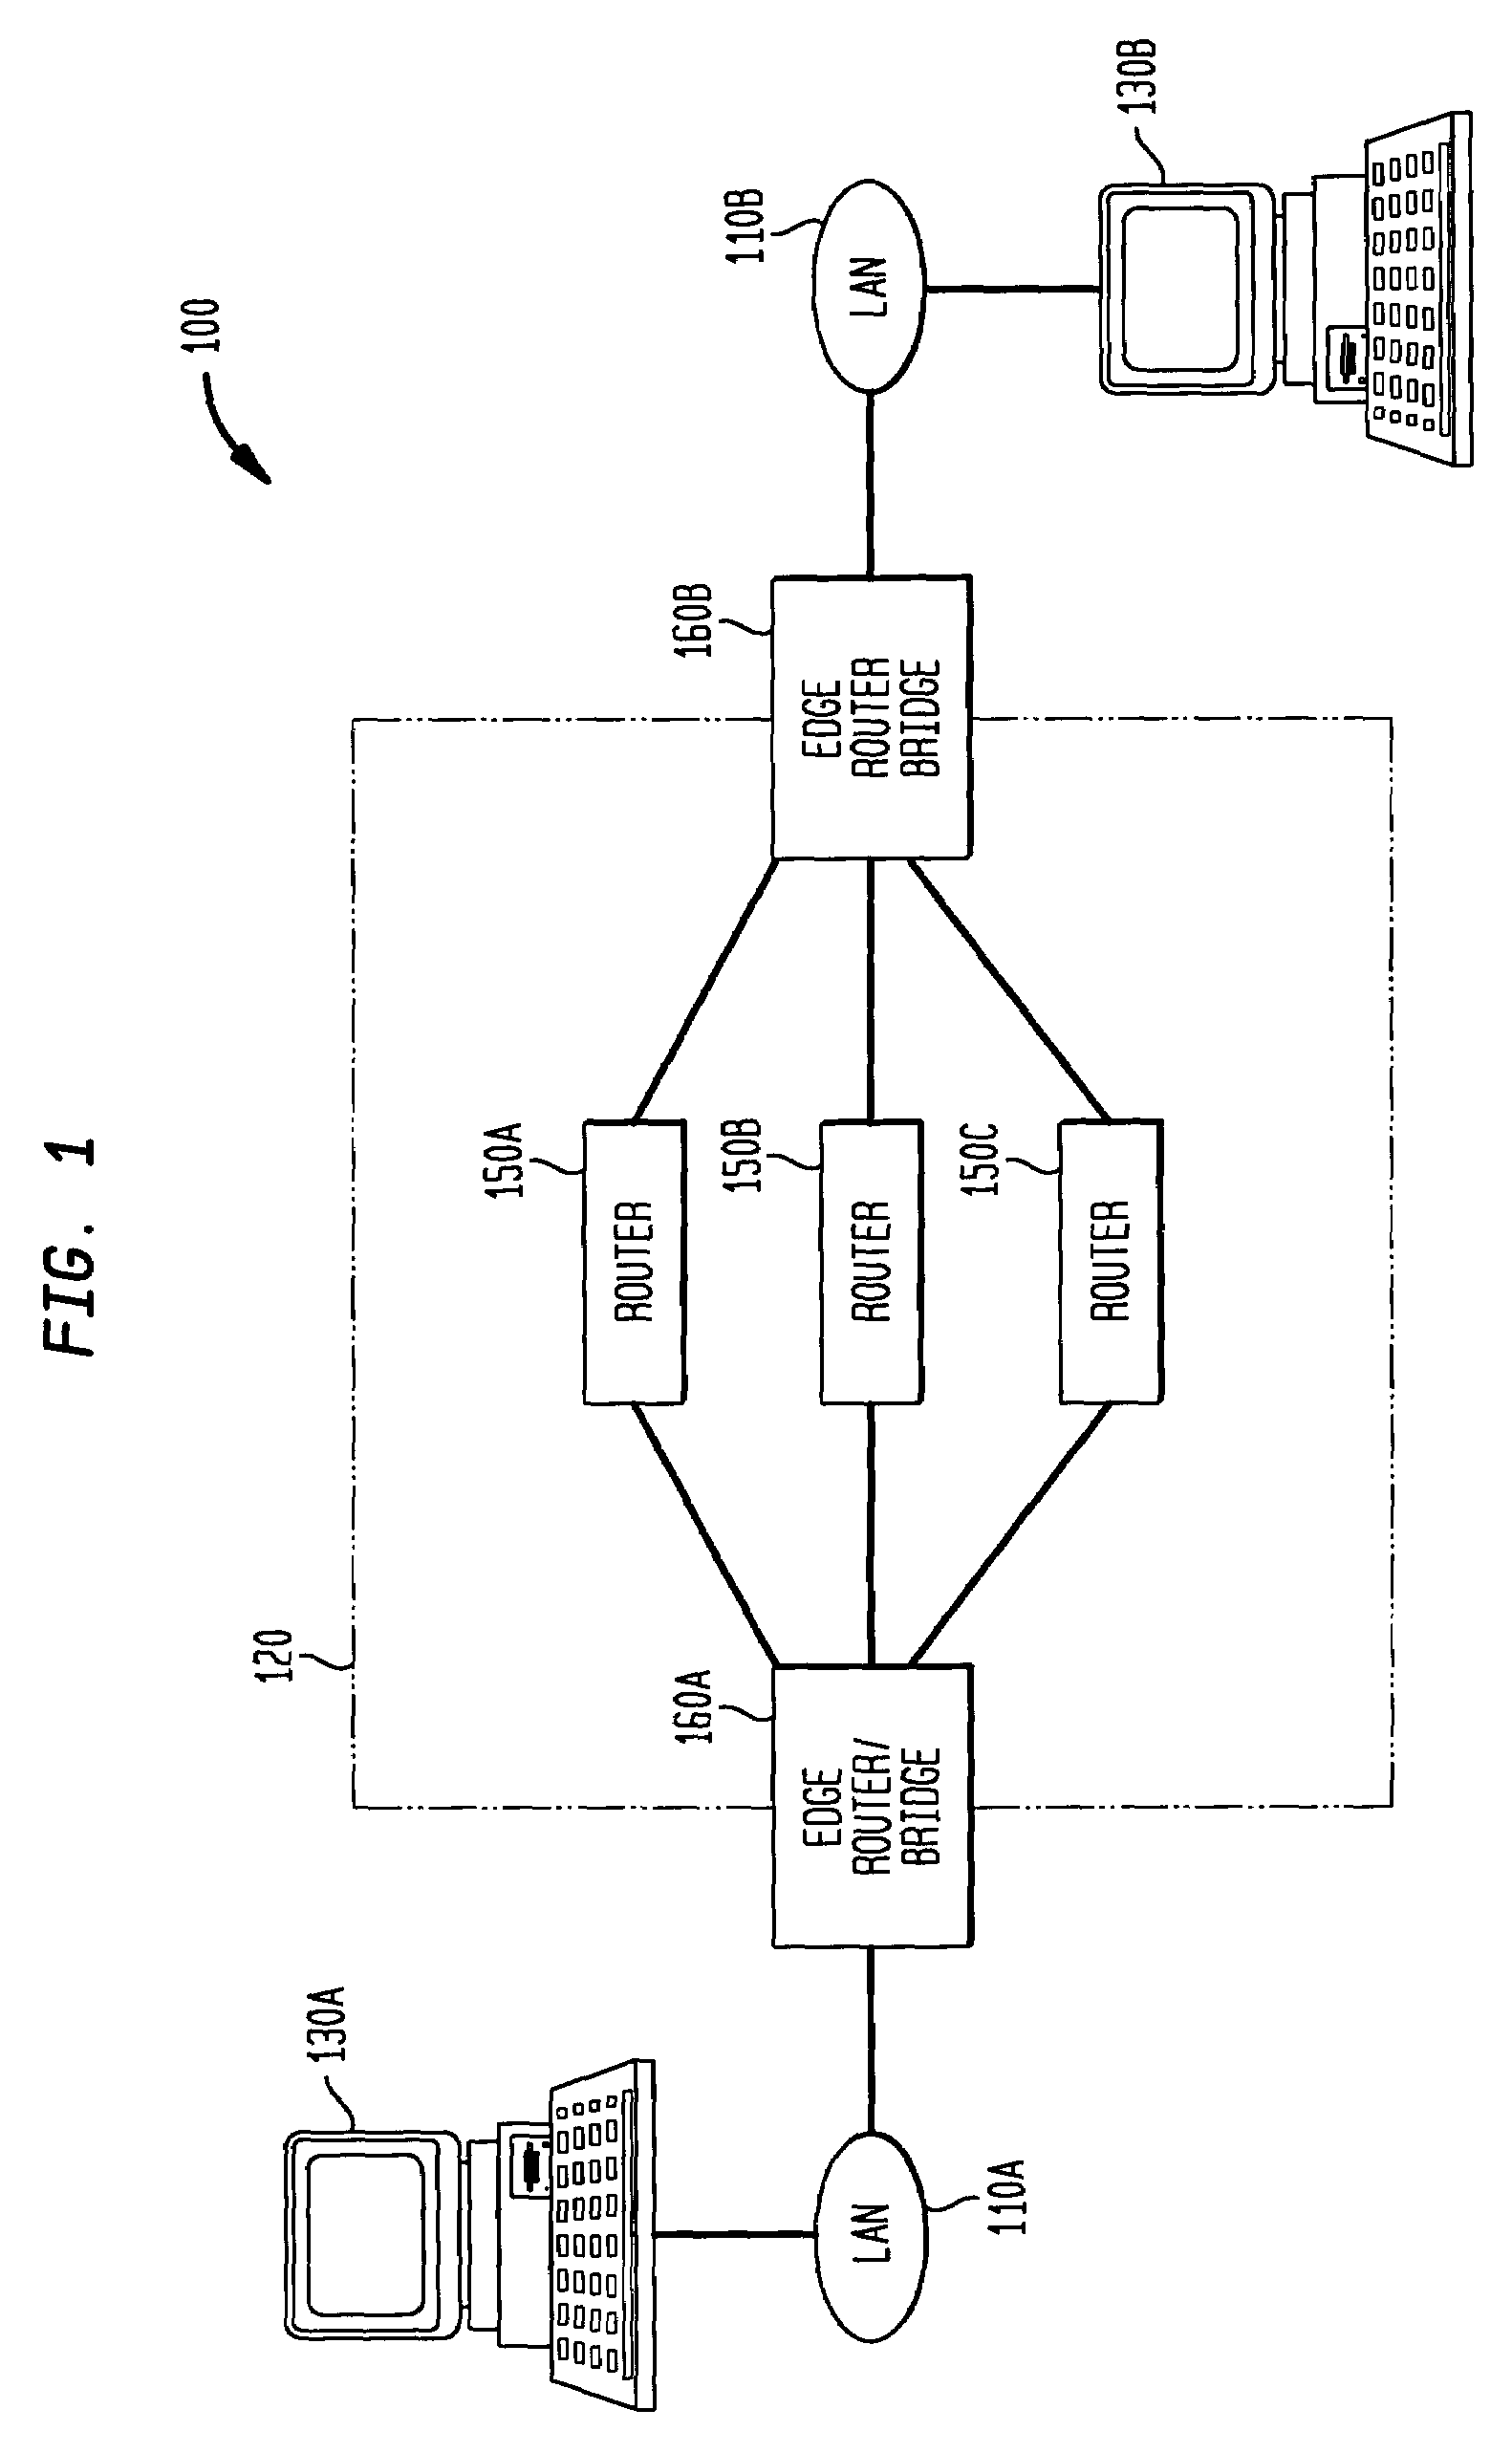 Methods and apparatus for data storage and retrieval